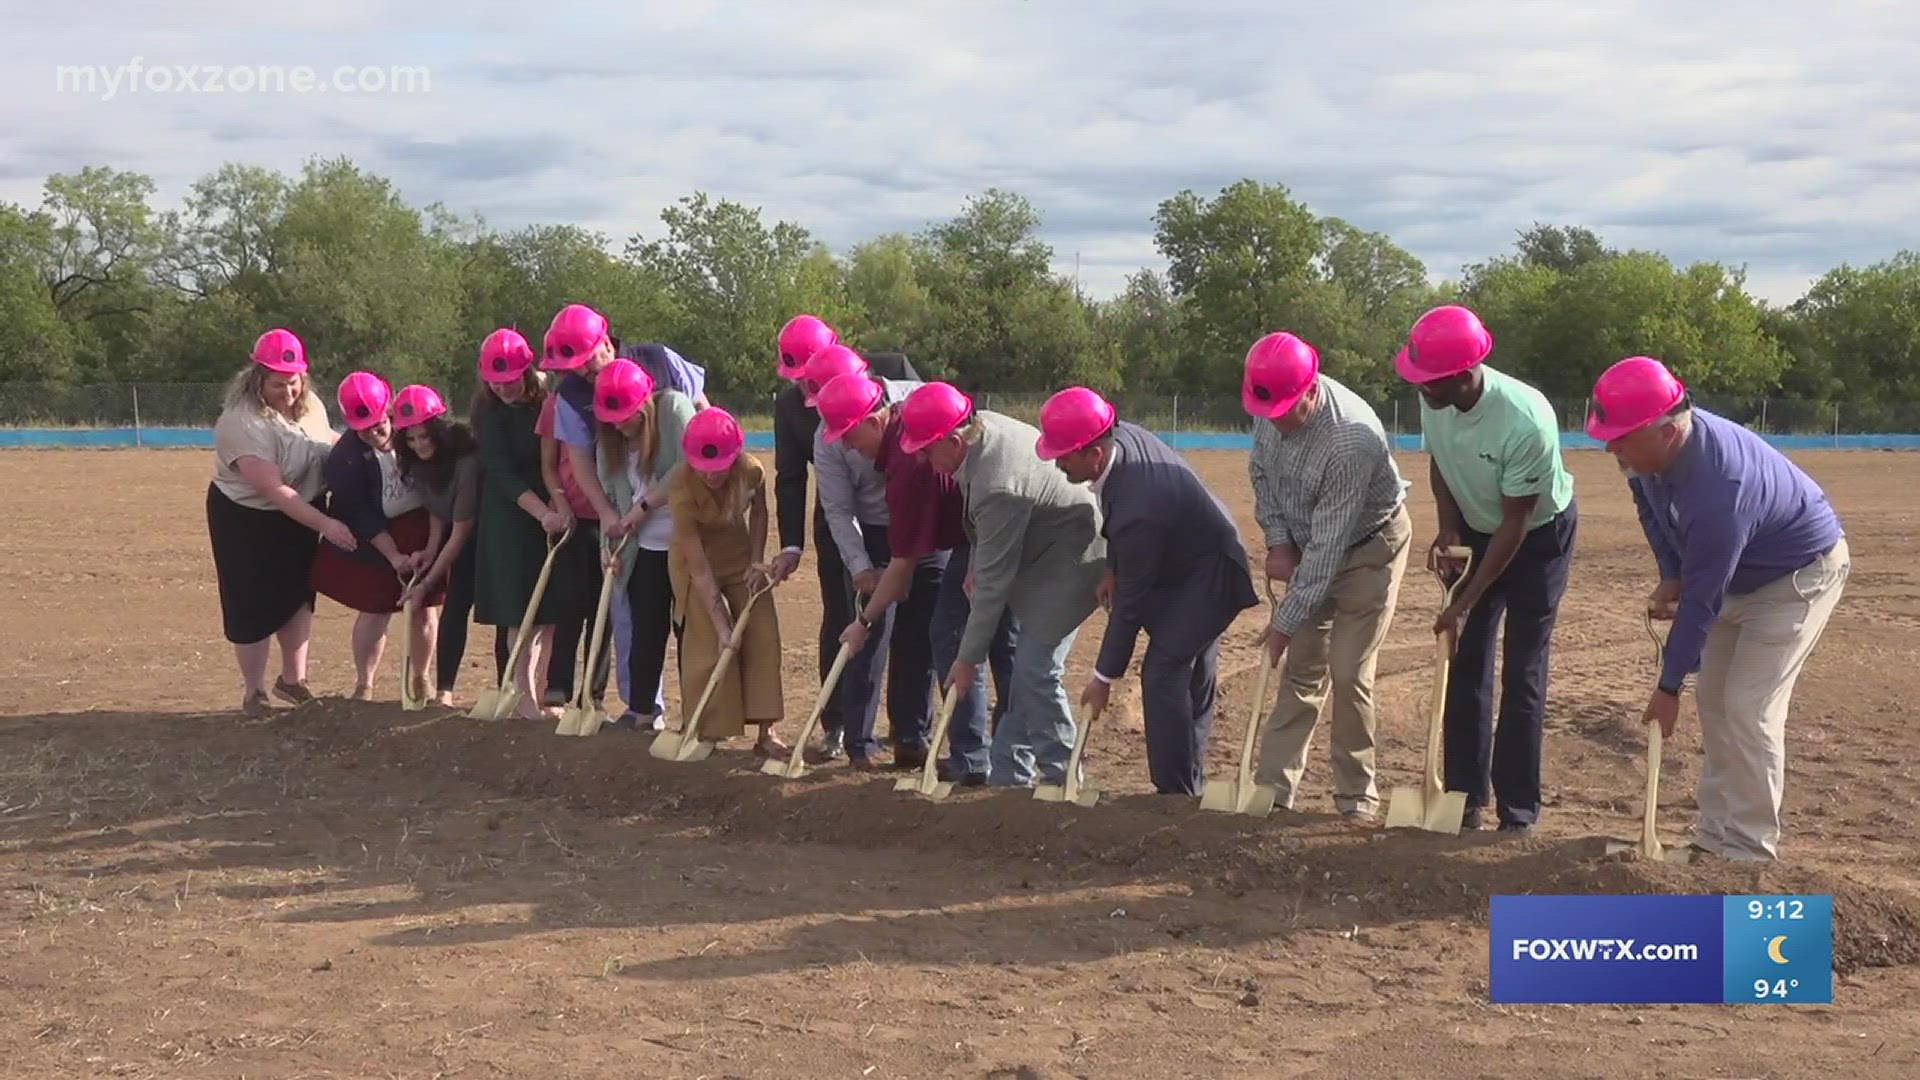 The City of Abilene came to support the All Kind Animal Initiative Tuesday morning as they broke ground on their new shelter facility to be built, The PARC.